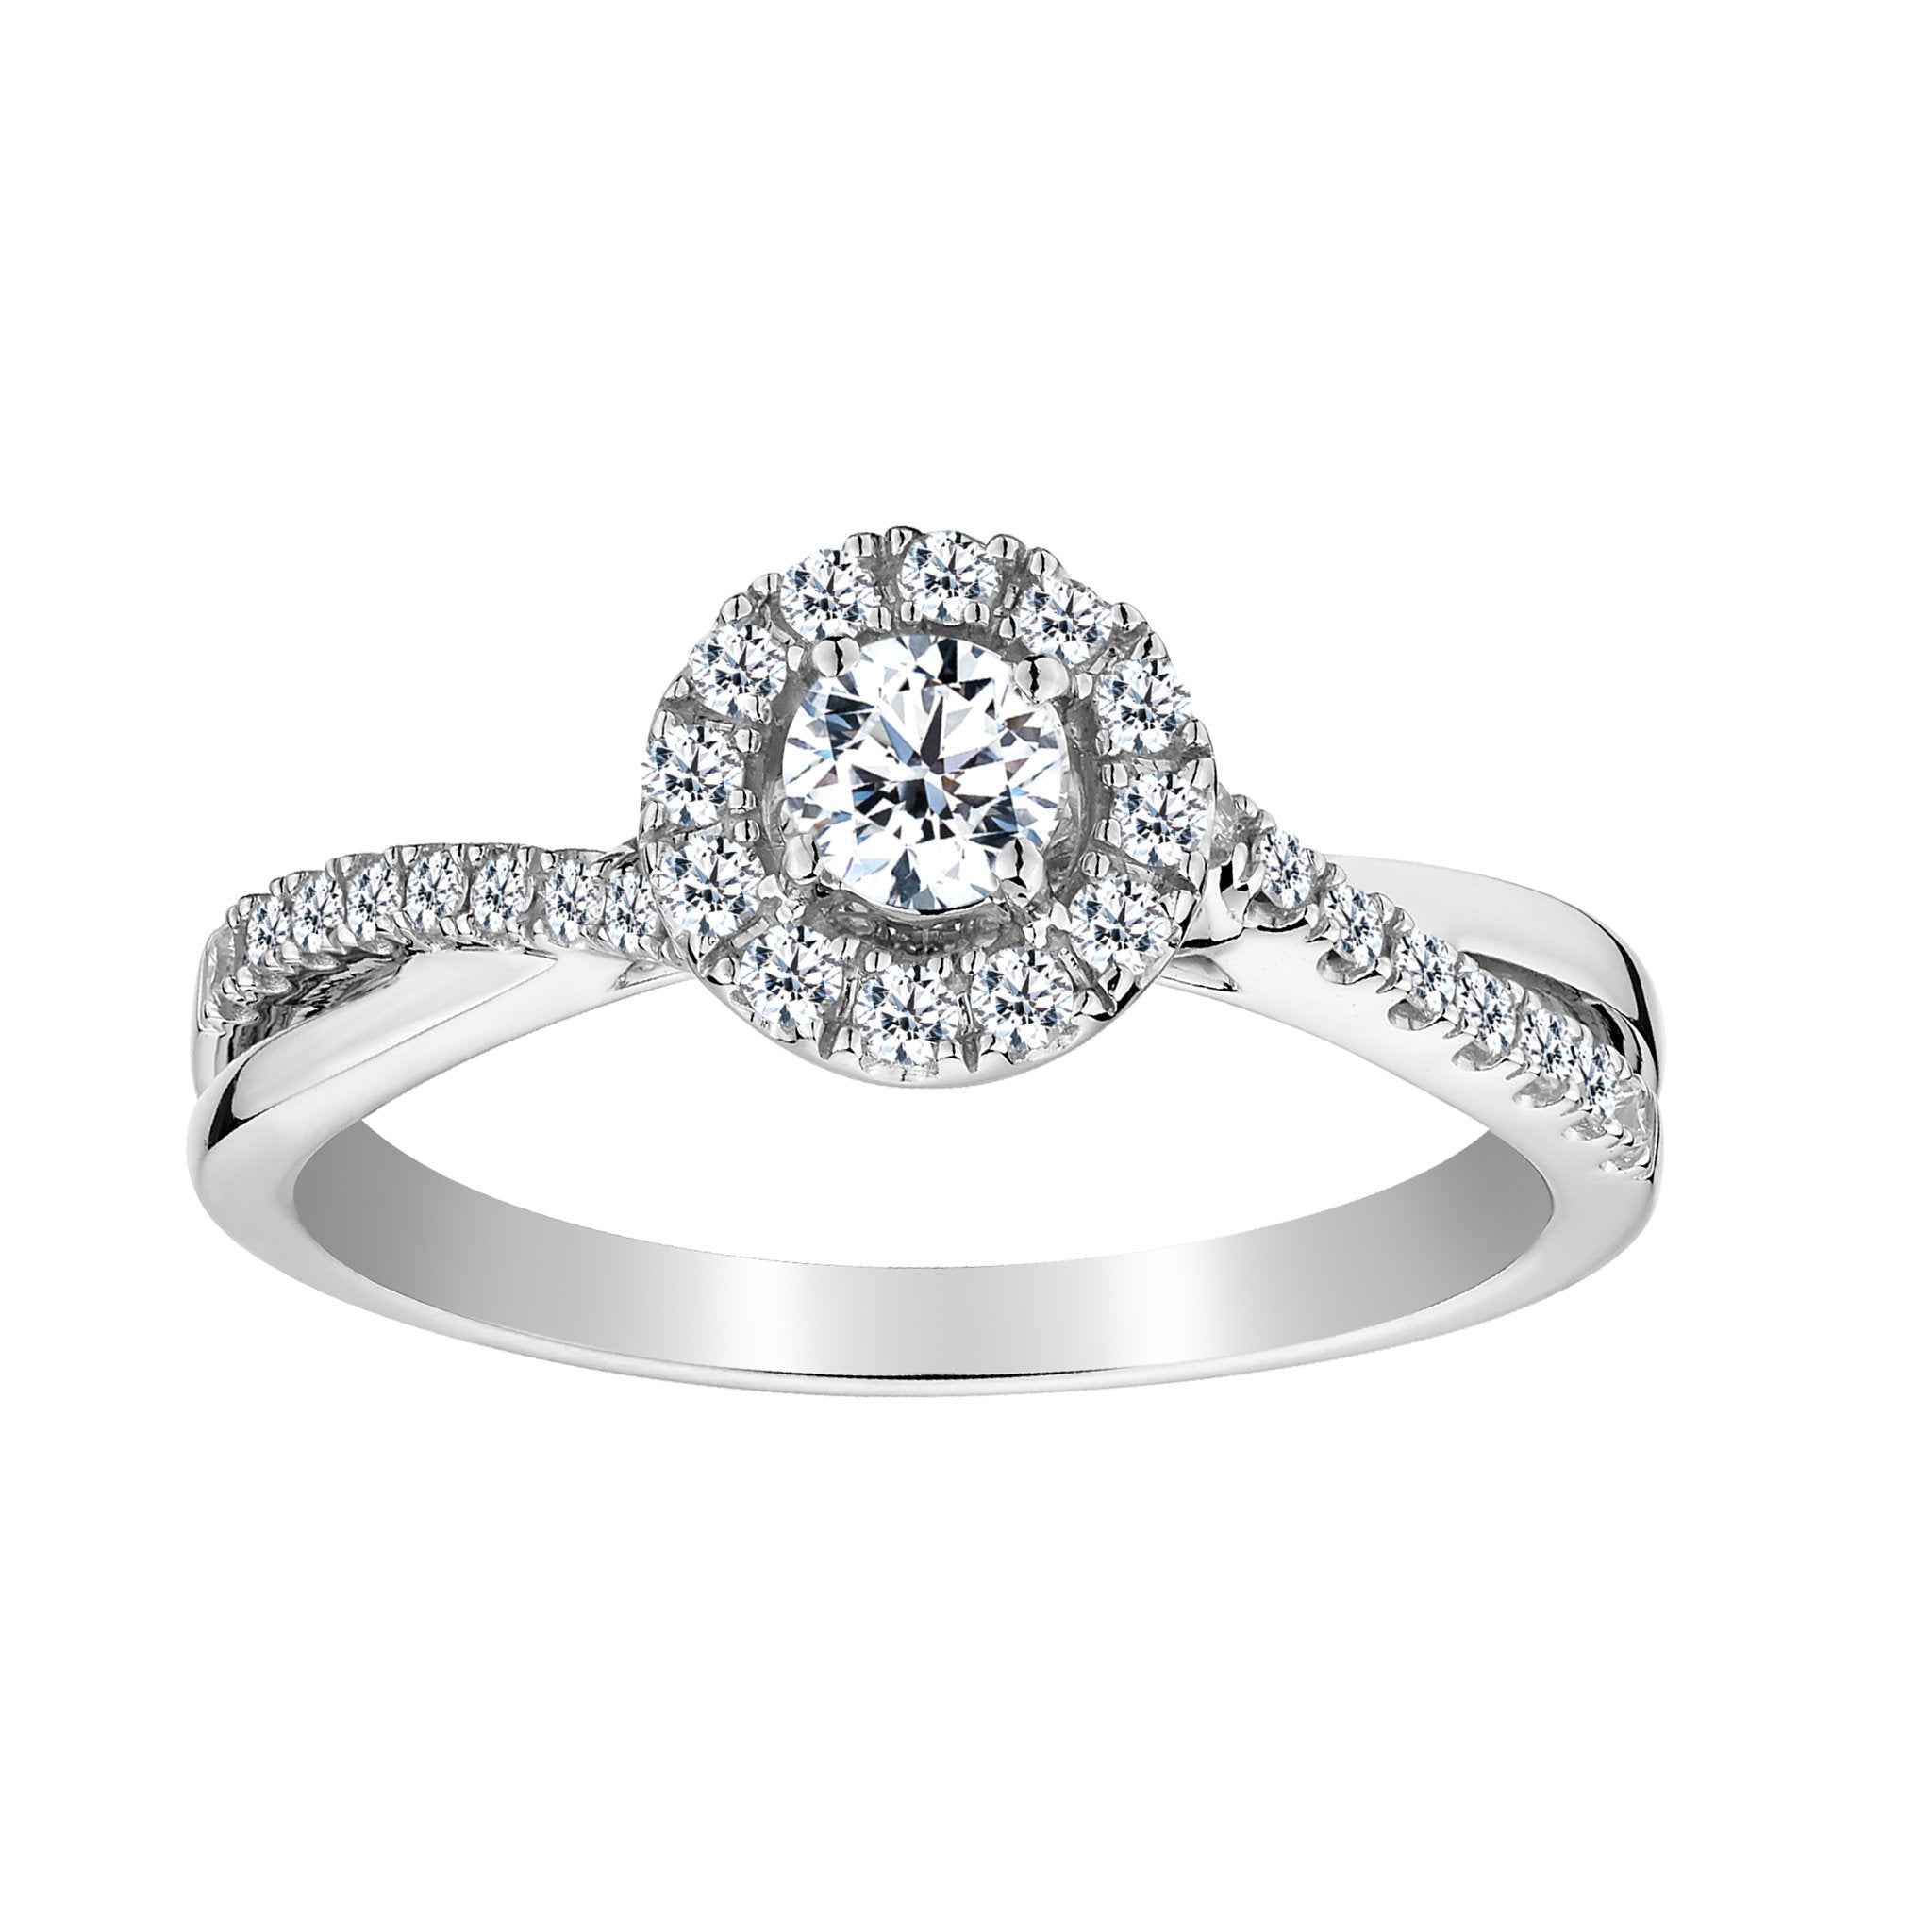 .50 CARAT DIAMOND HALO RING , 10kt WHITE GOLD - Griffin Jewellery Designs